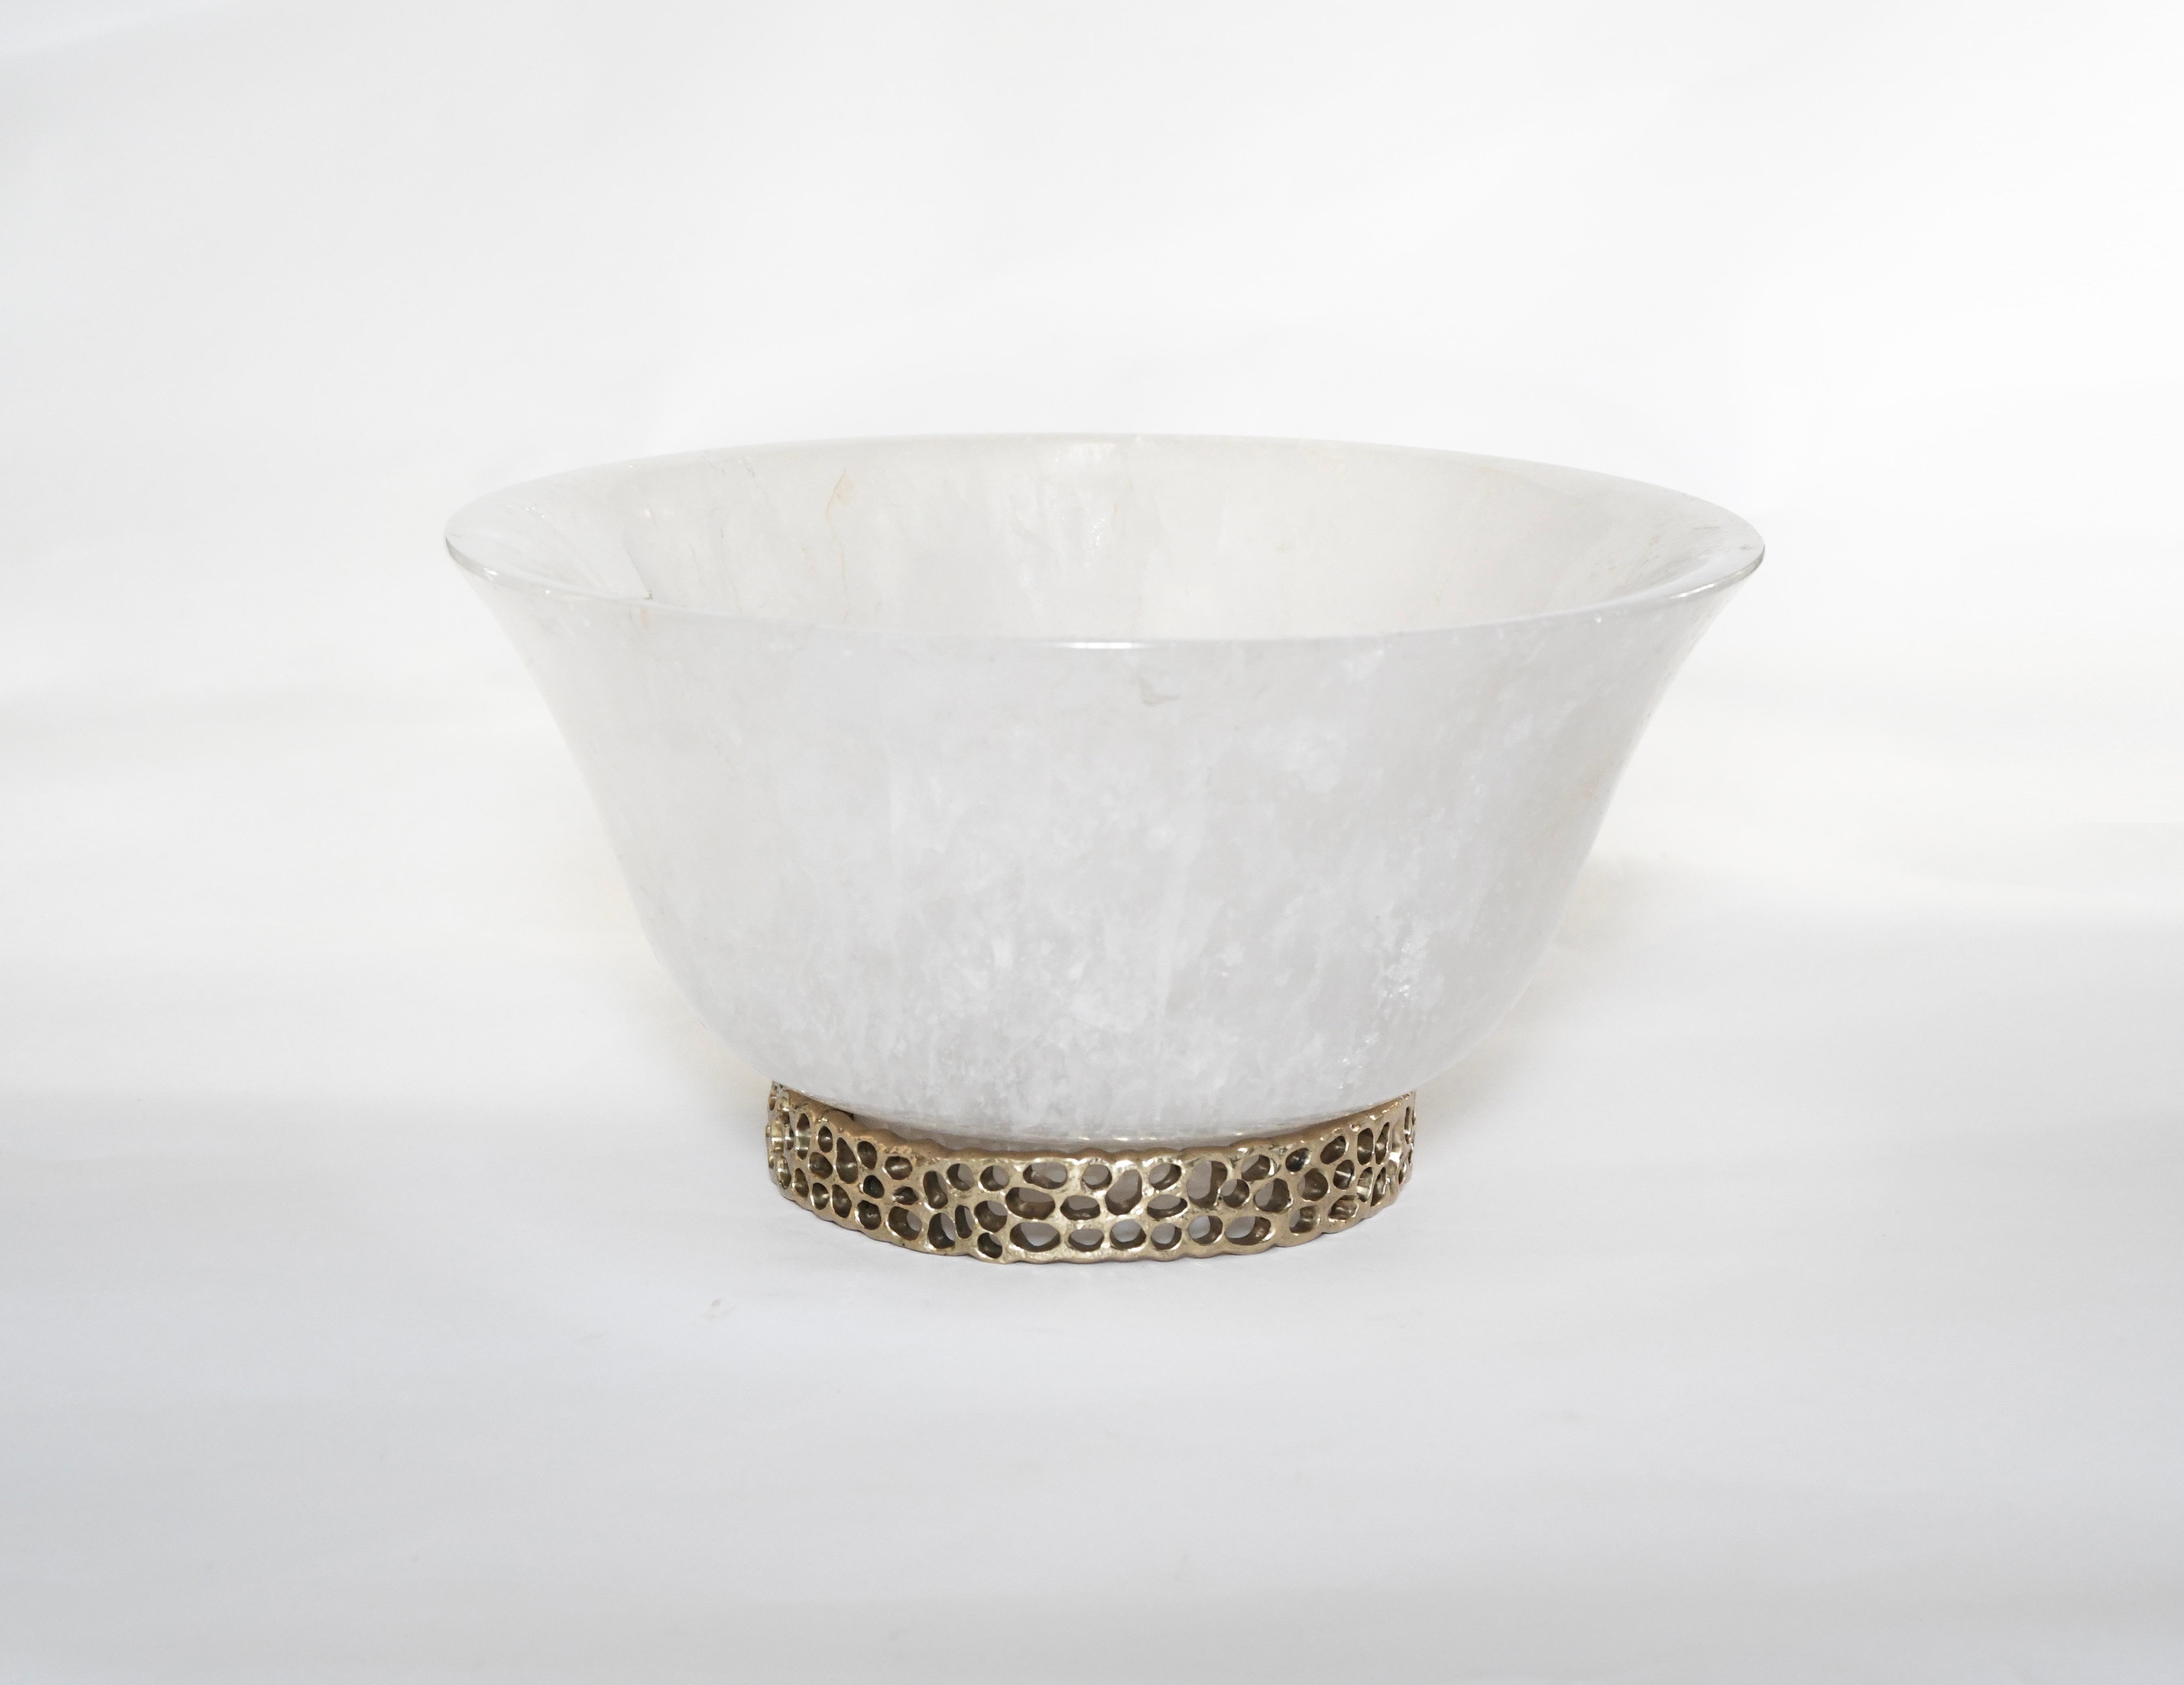 Carved rock crystal centerpiece. Designed brass base with hammered detail. Created by Phoenix Gallery, NYC.
 